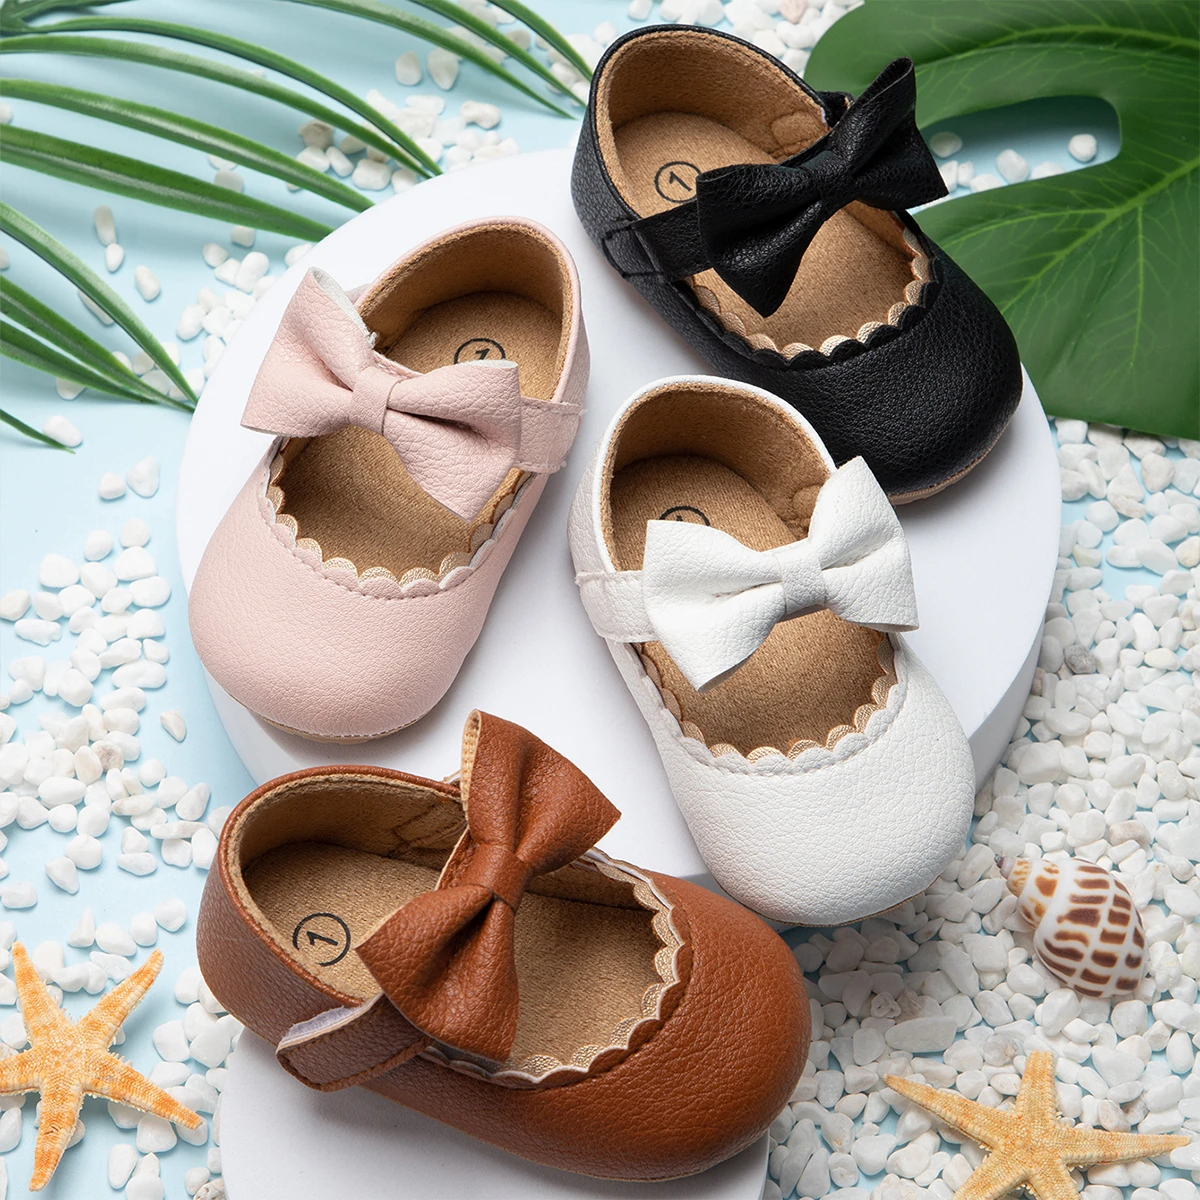 KIDSUN Classic Baby Shoes Infant Toddler Bow Non-slip Rubber Flat Soft-sole PU First Walkers Newborn Baby Girl Shoes Accessories